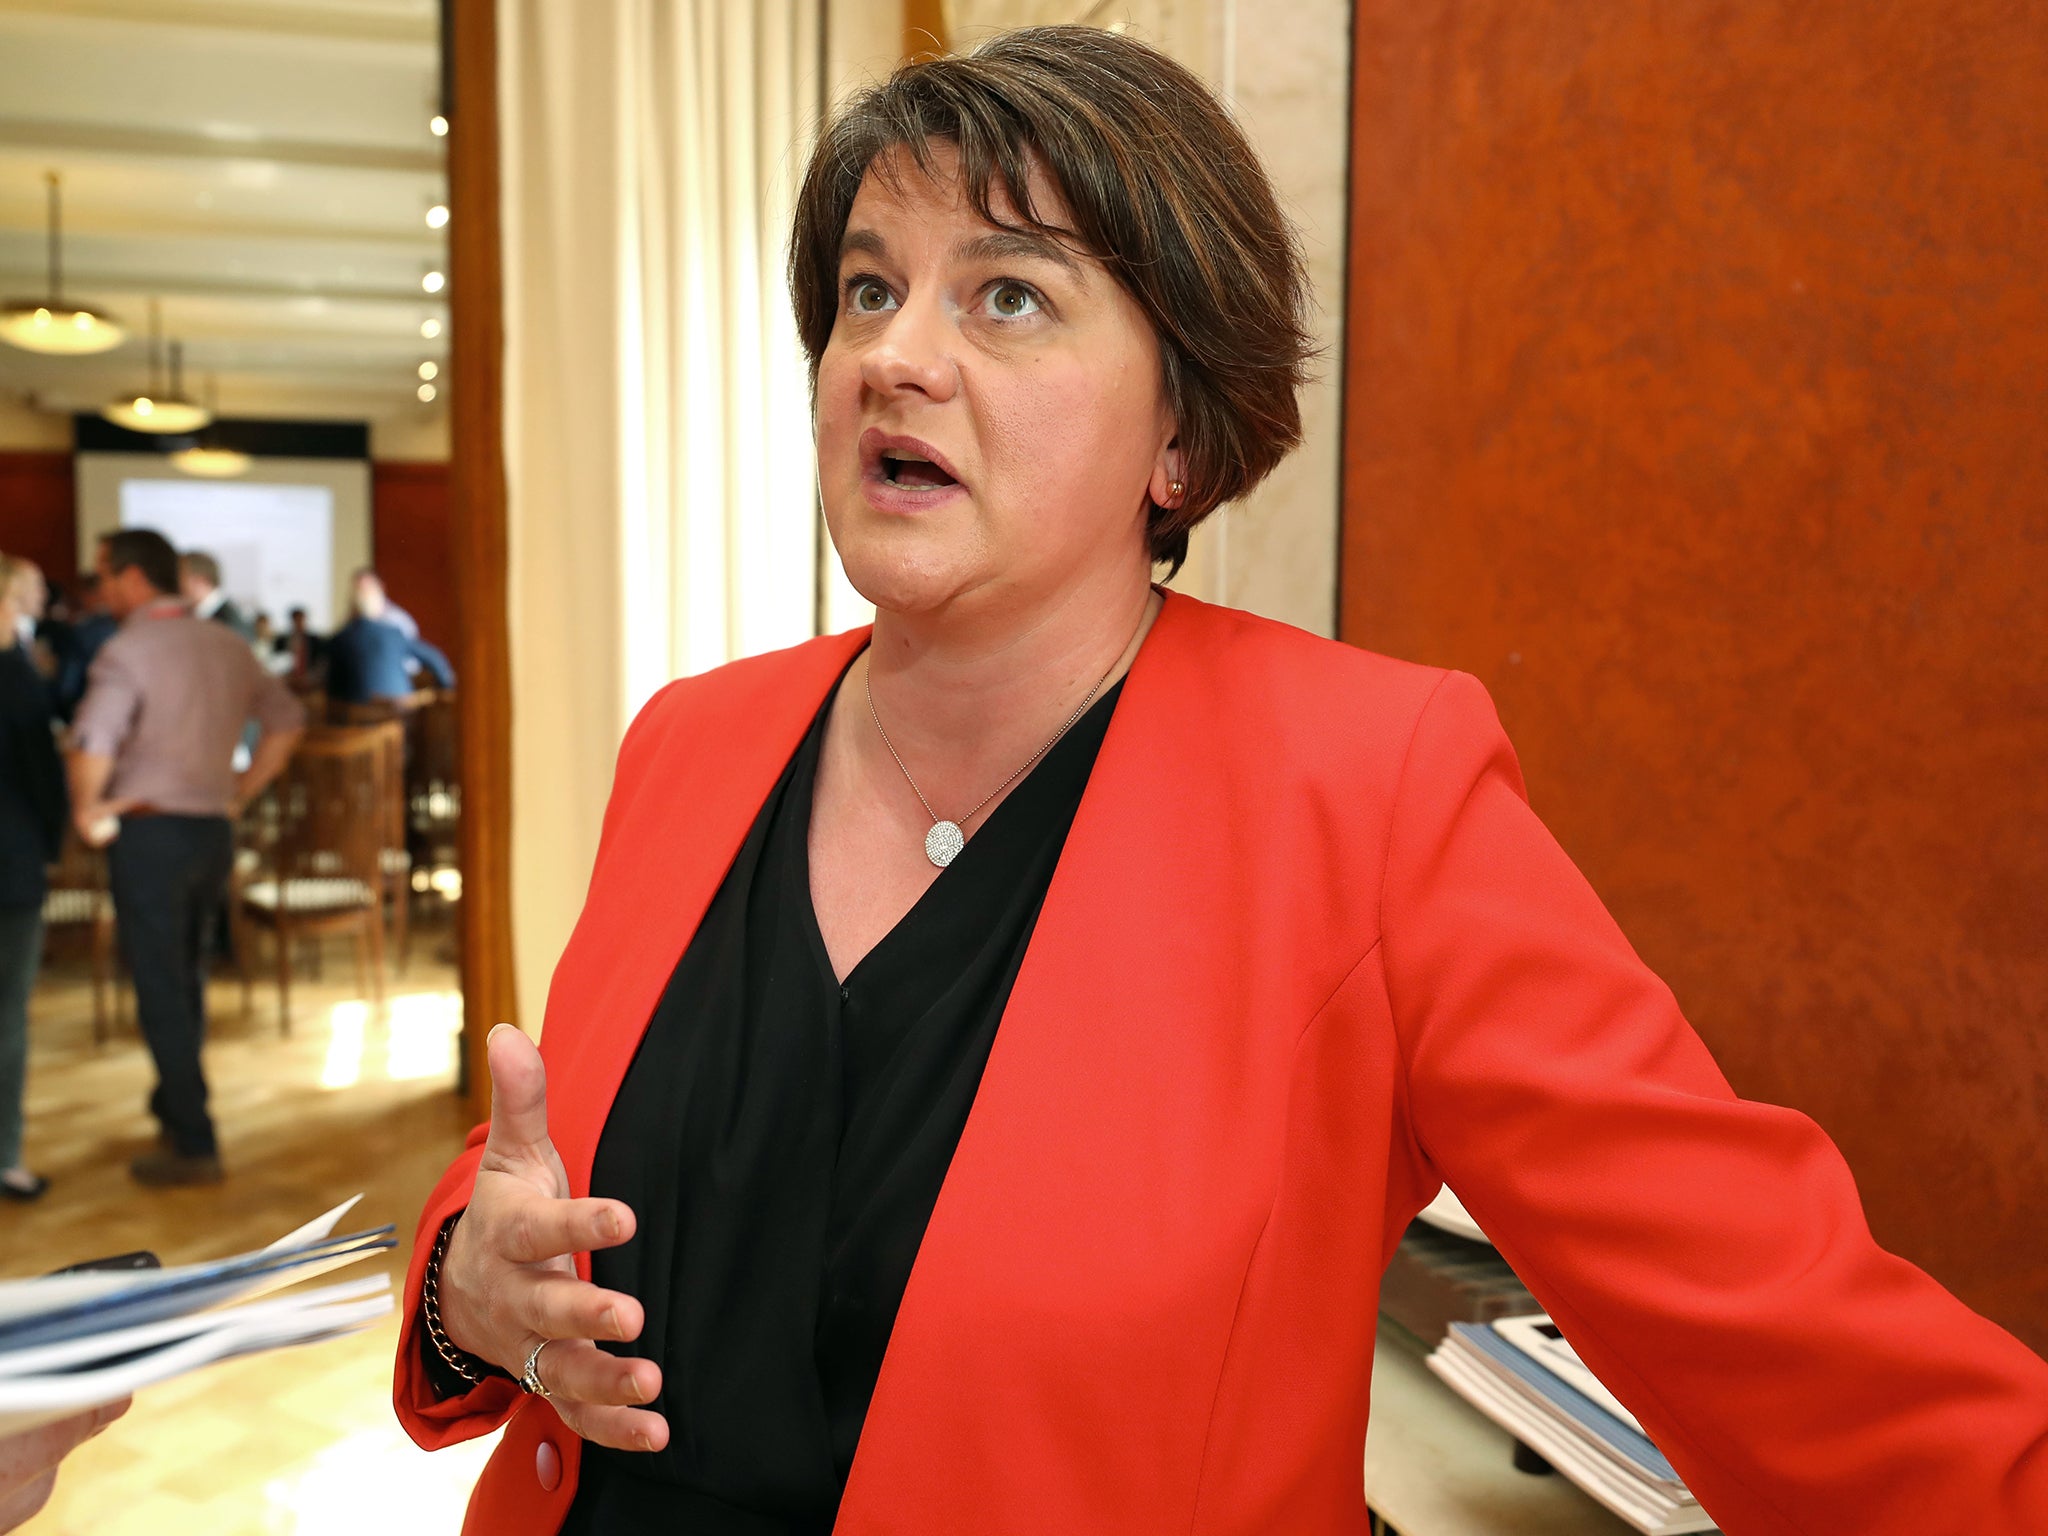 DUP Leader Arlene Foster speaks to the media at Stormont Parliament in Belfast